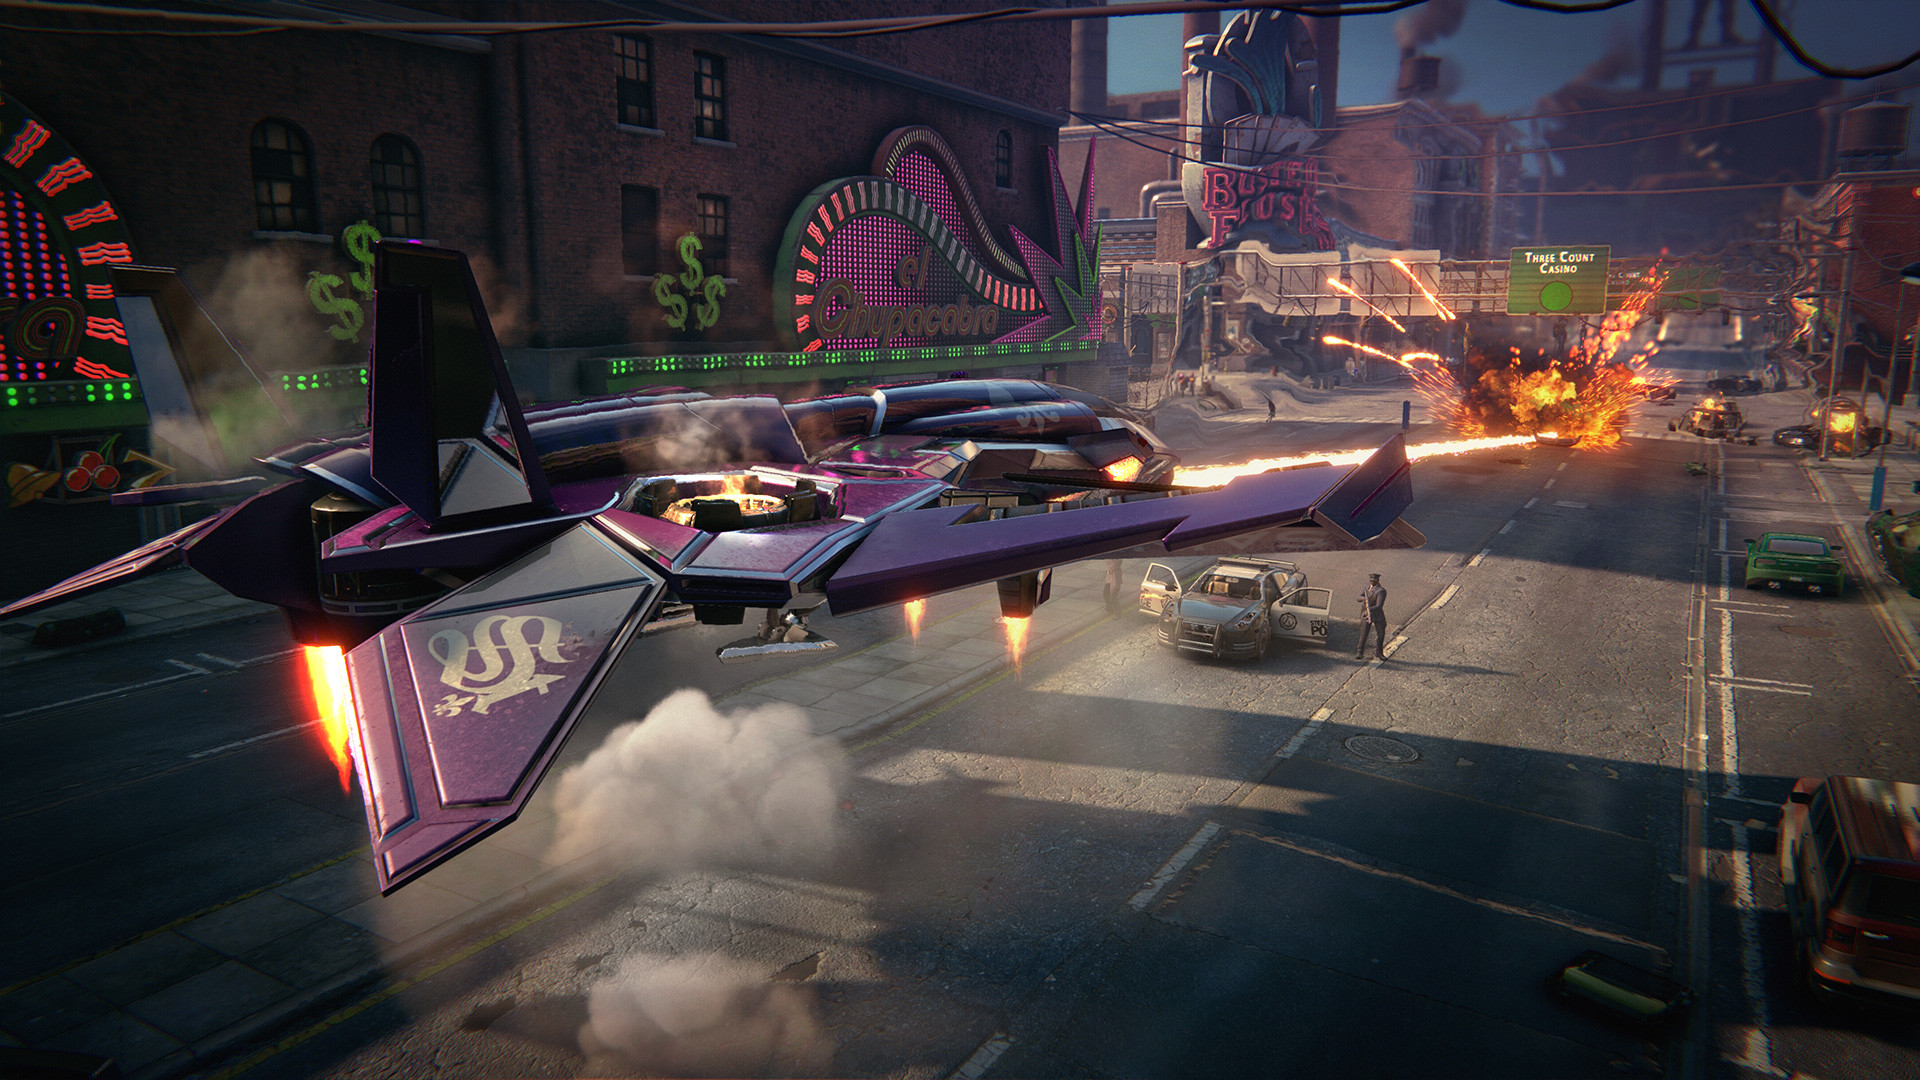 Buy Saints Row The Third Remastered